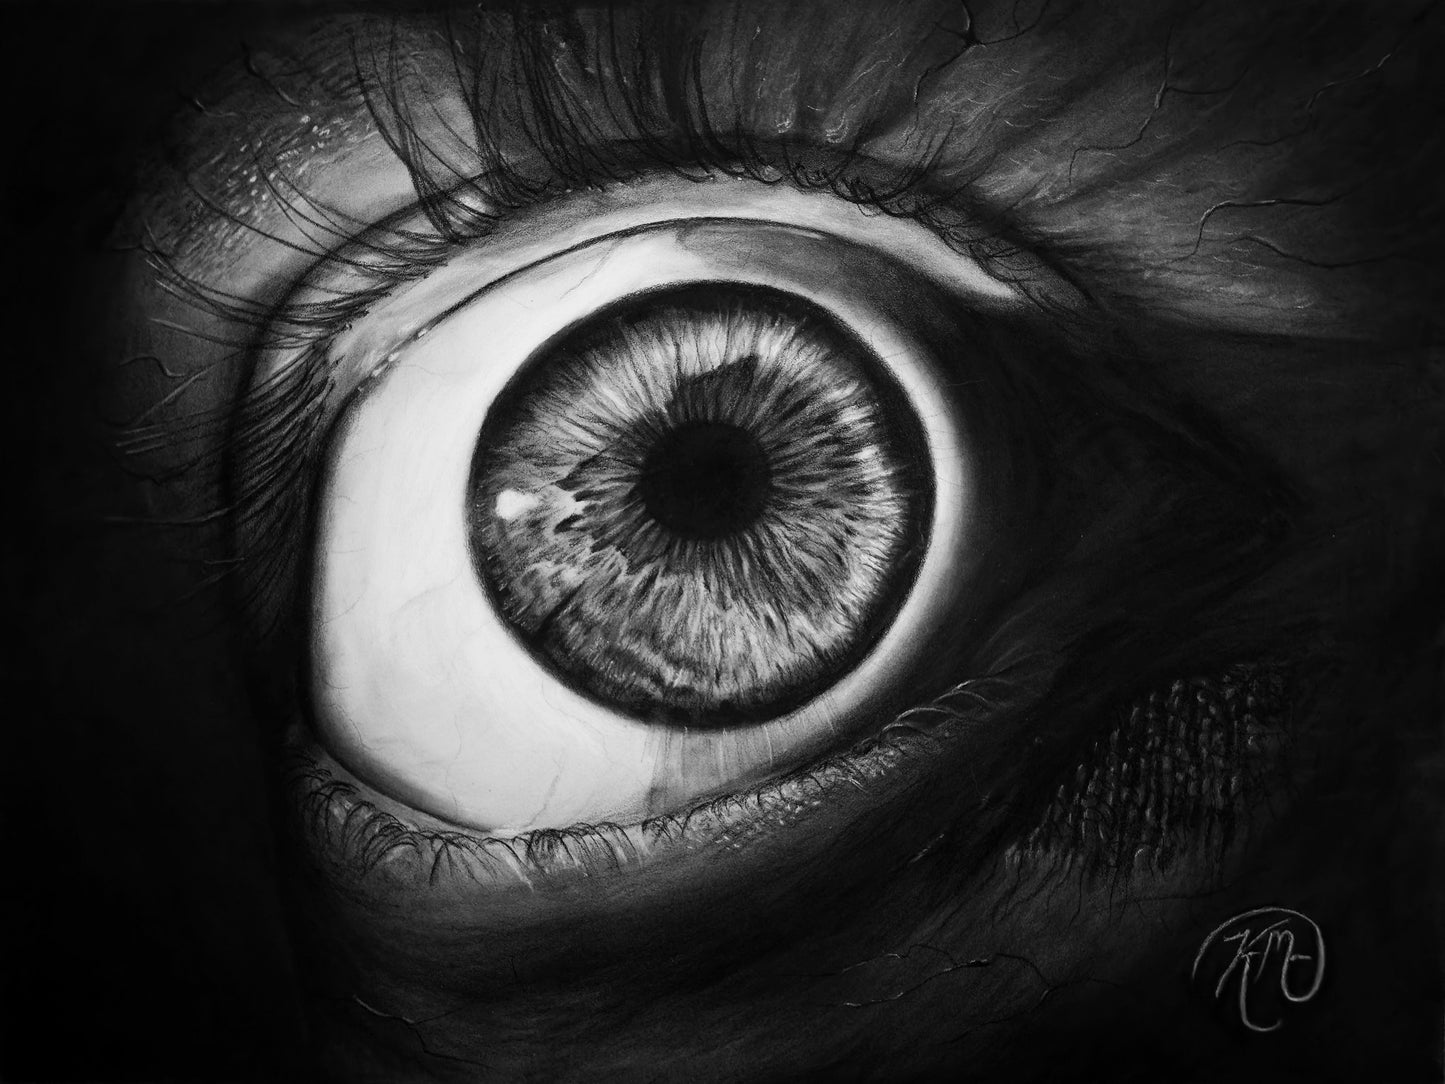 "Eye of the Beholder" Limited Edition Prints